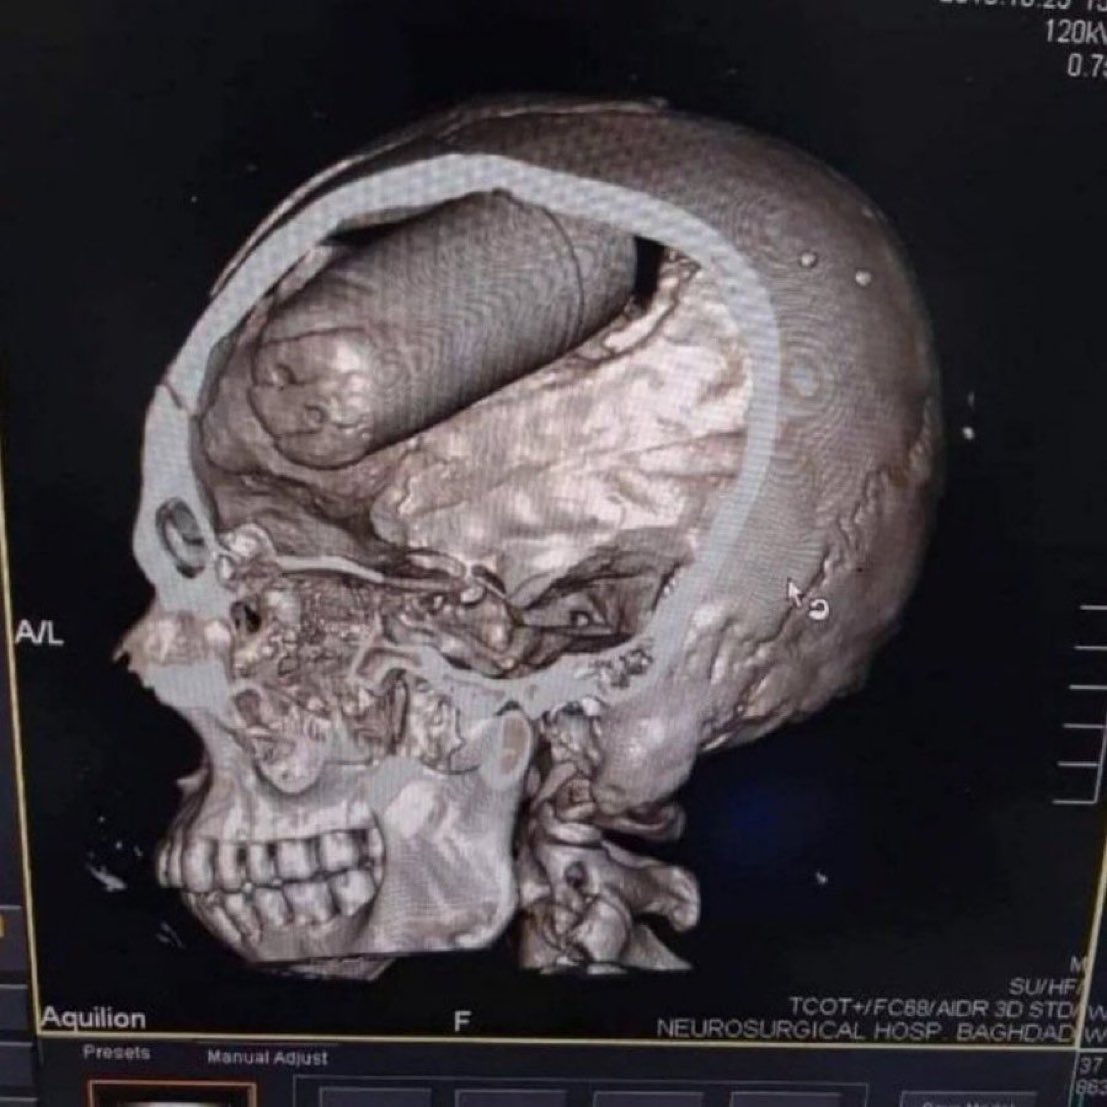 ‘Harrowing X-ray reveals a tear gas canister that tragically became embedded in a protester's brain during anti-government protests in Iraq in 2019.’ Via @Morbidful